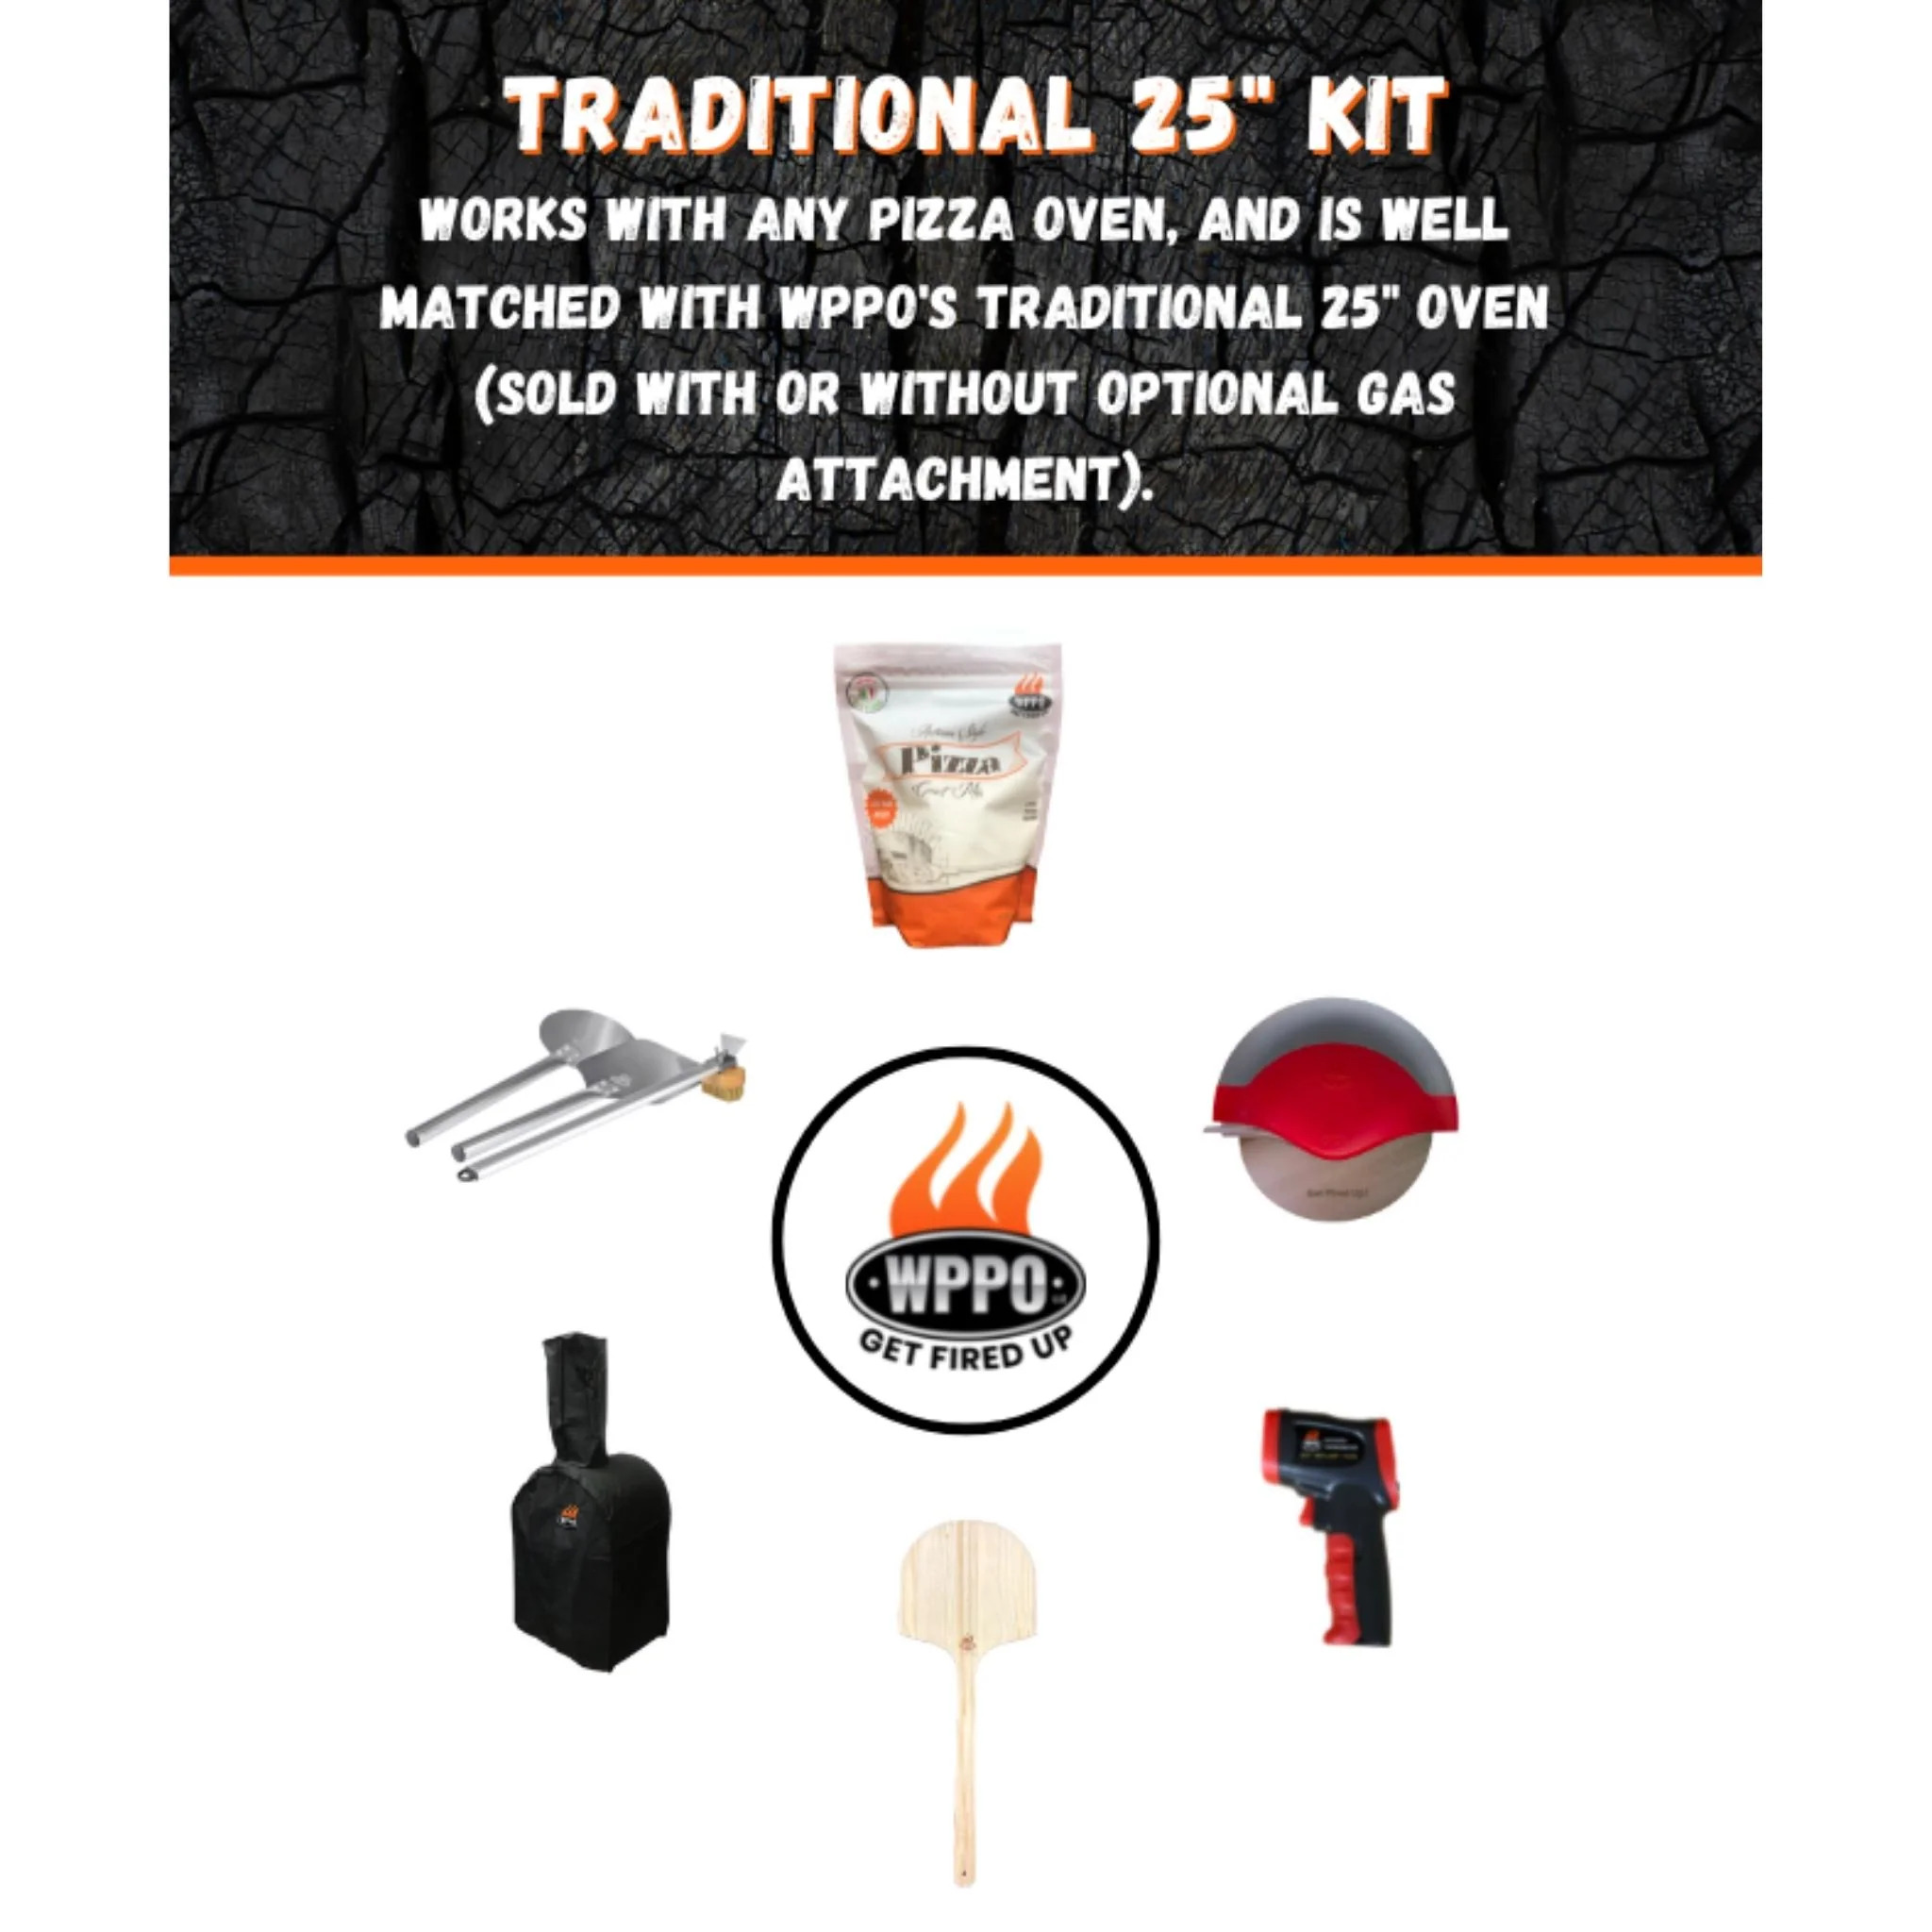 Traditional 25" Pizza Oven Kit - image 1 of 1